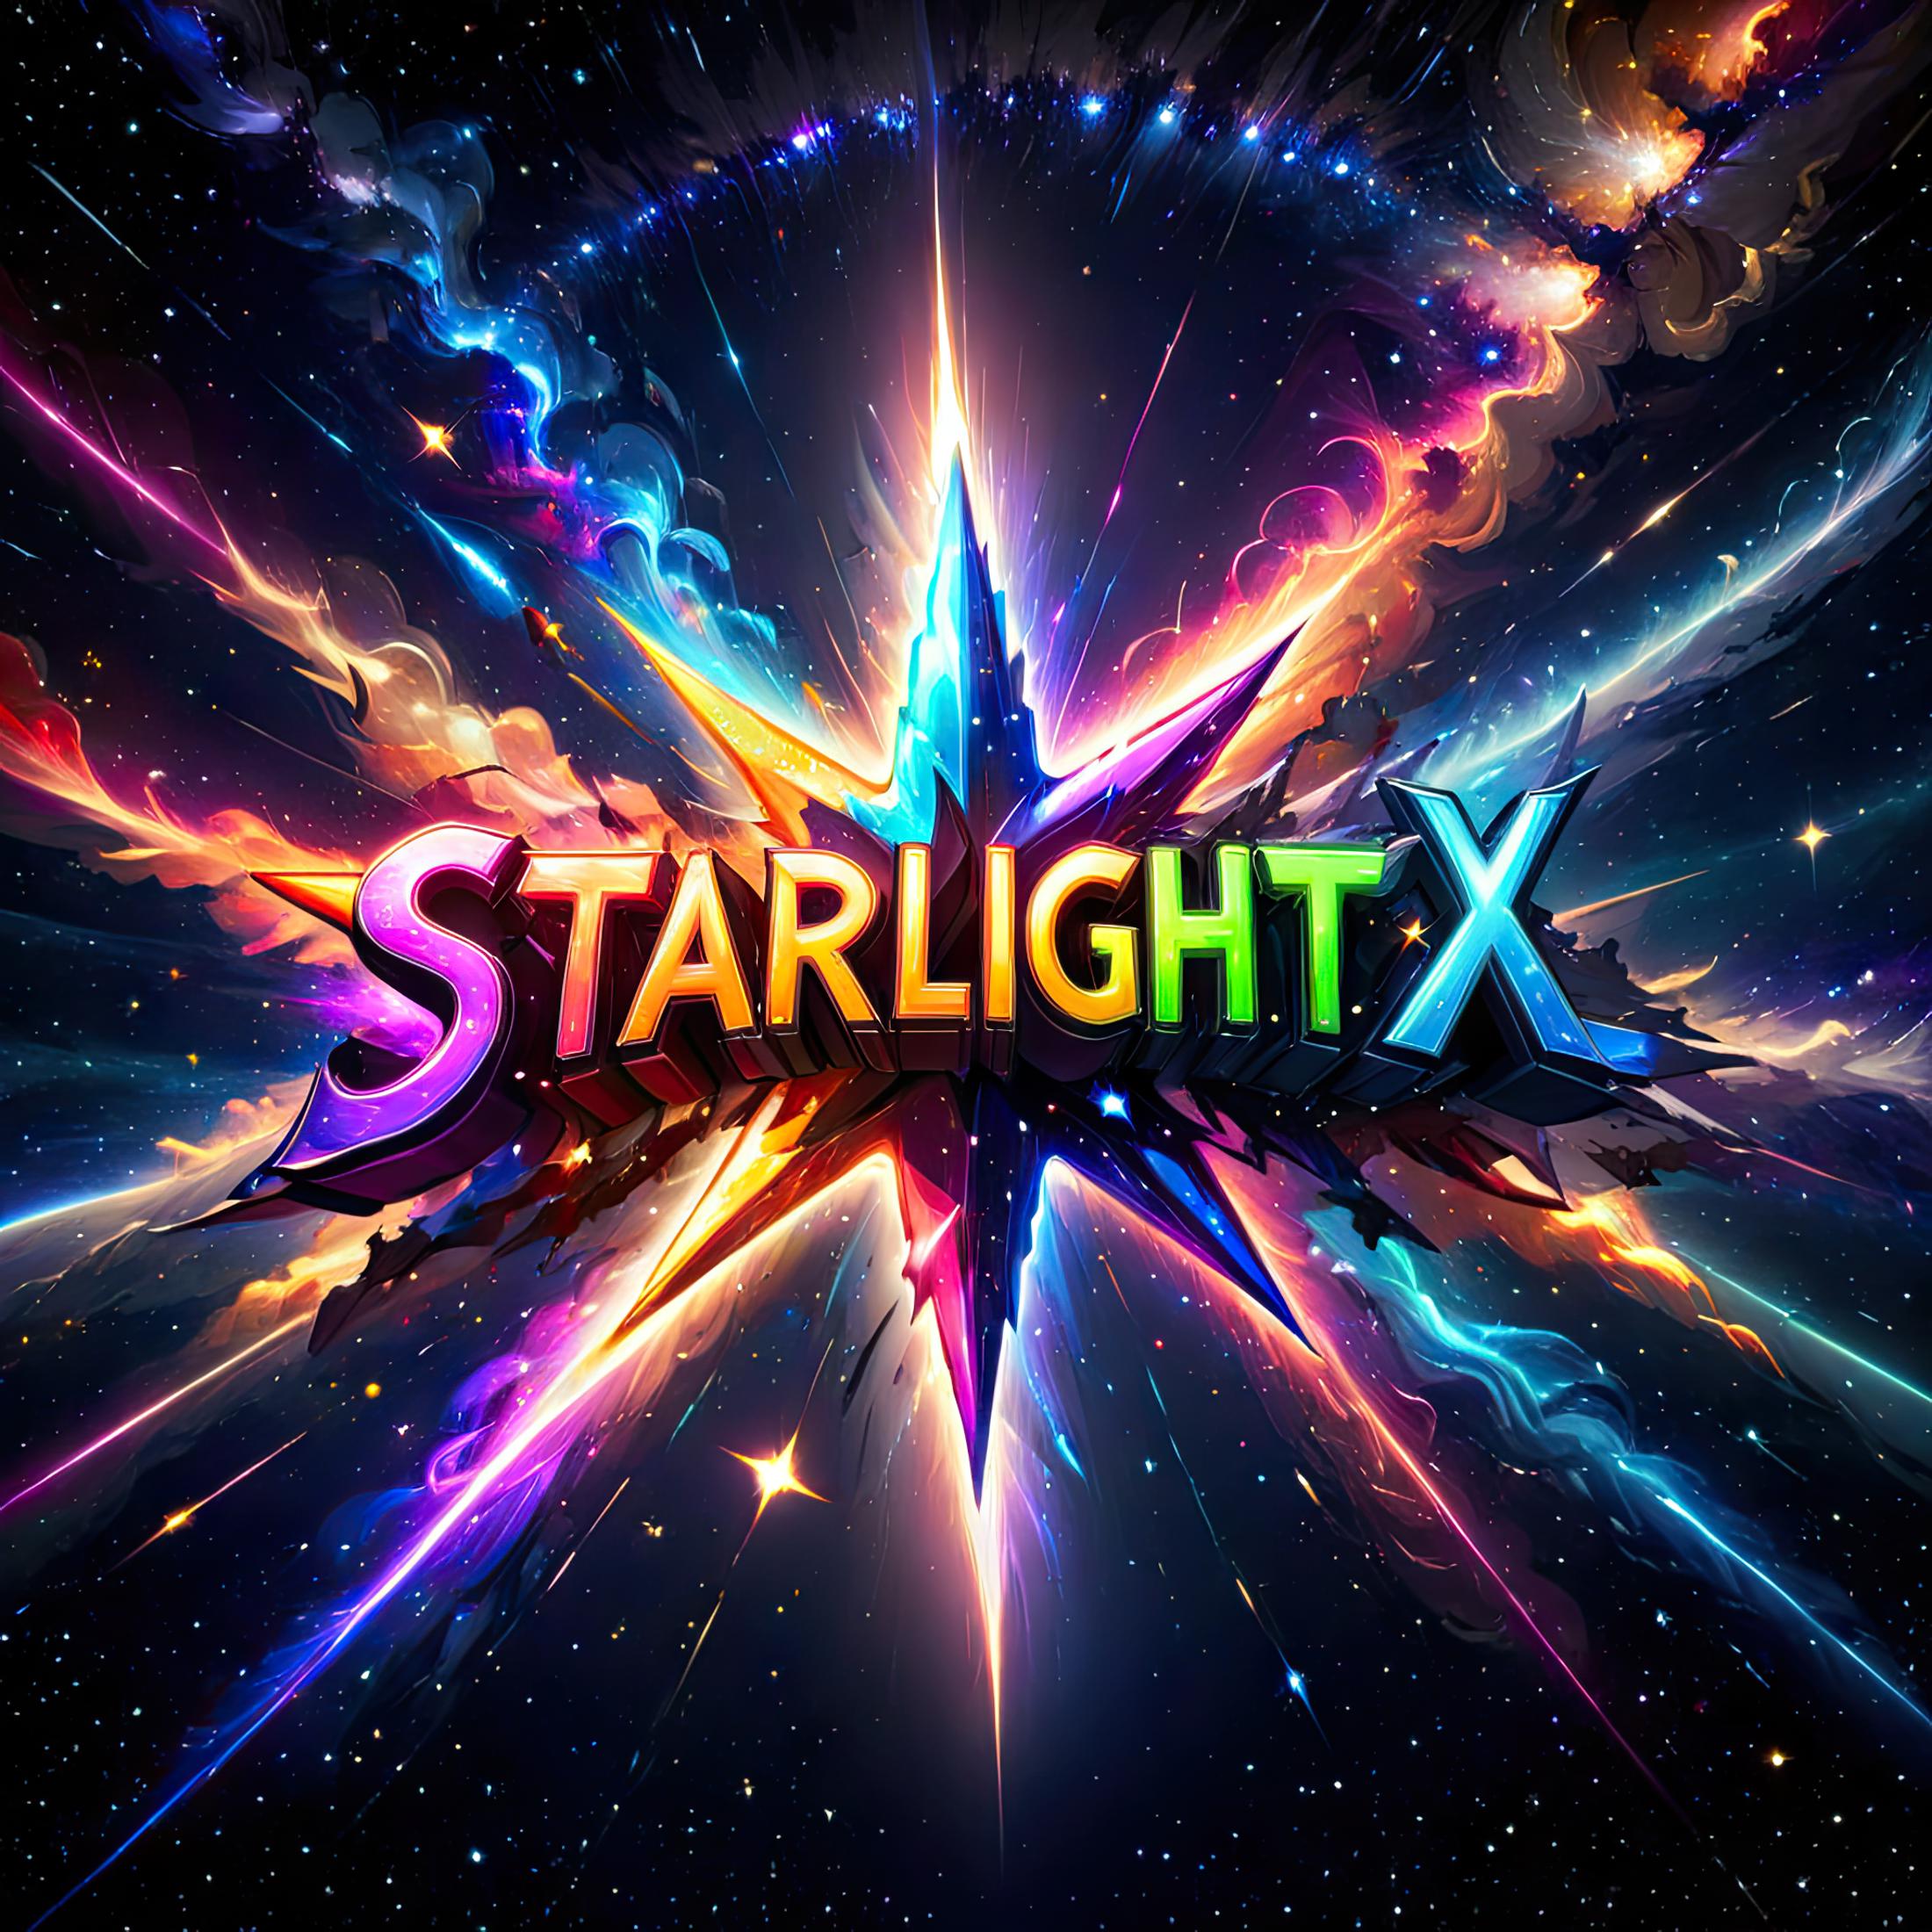 A Starlight X poster with a colorful star in the center.